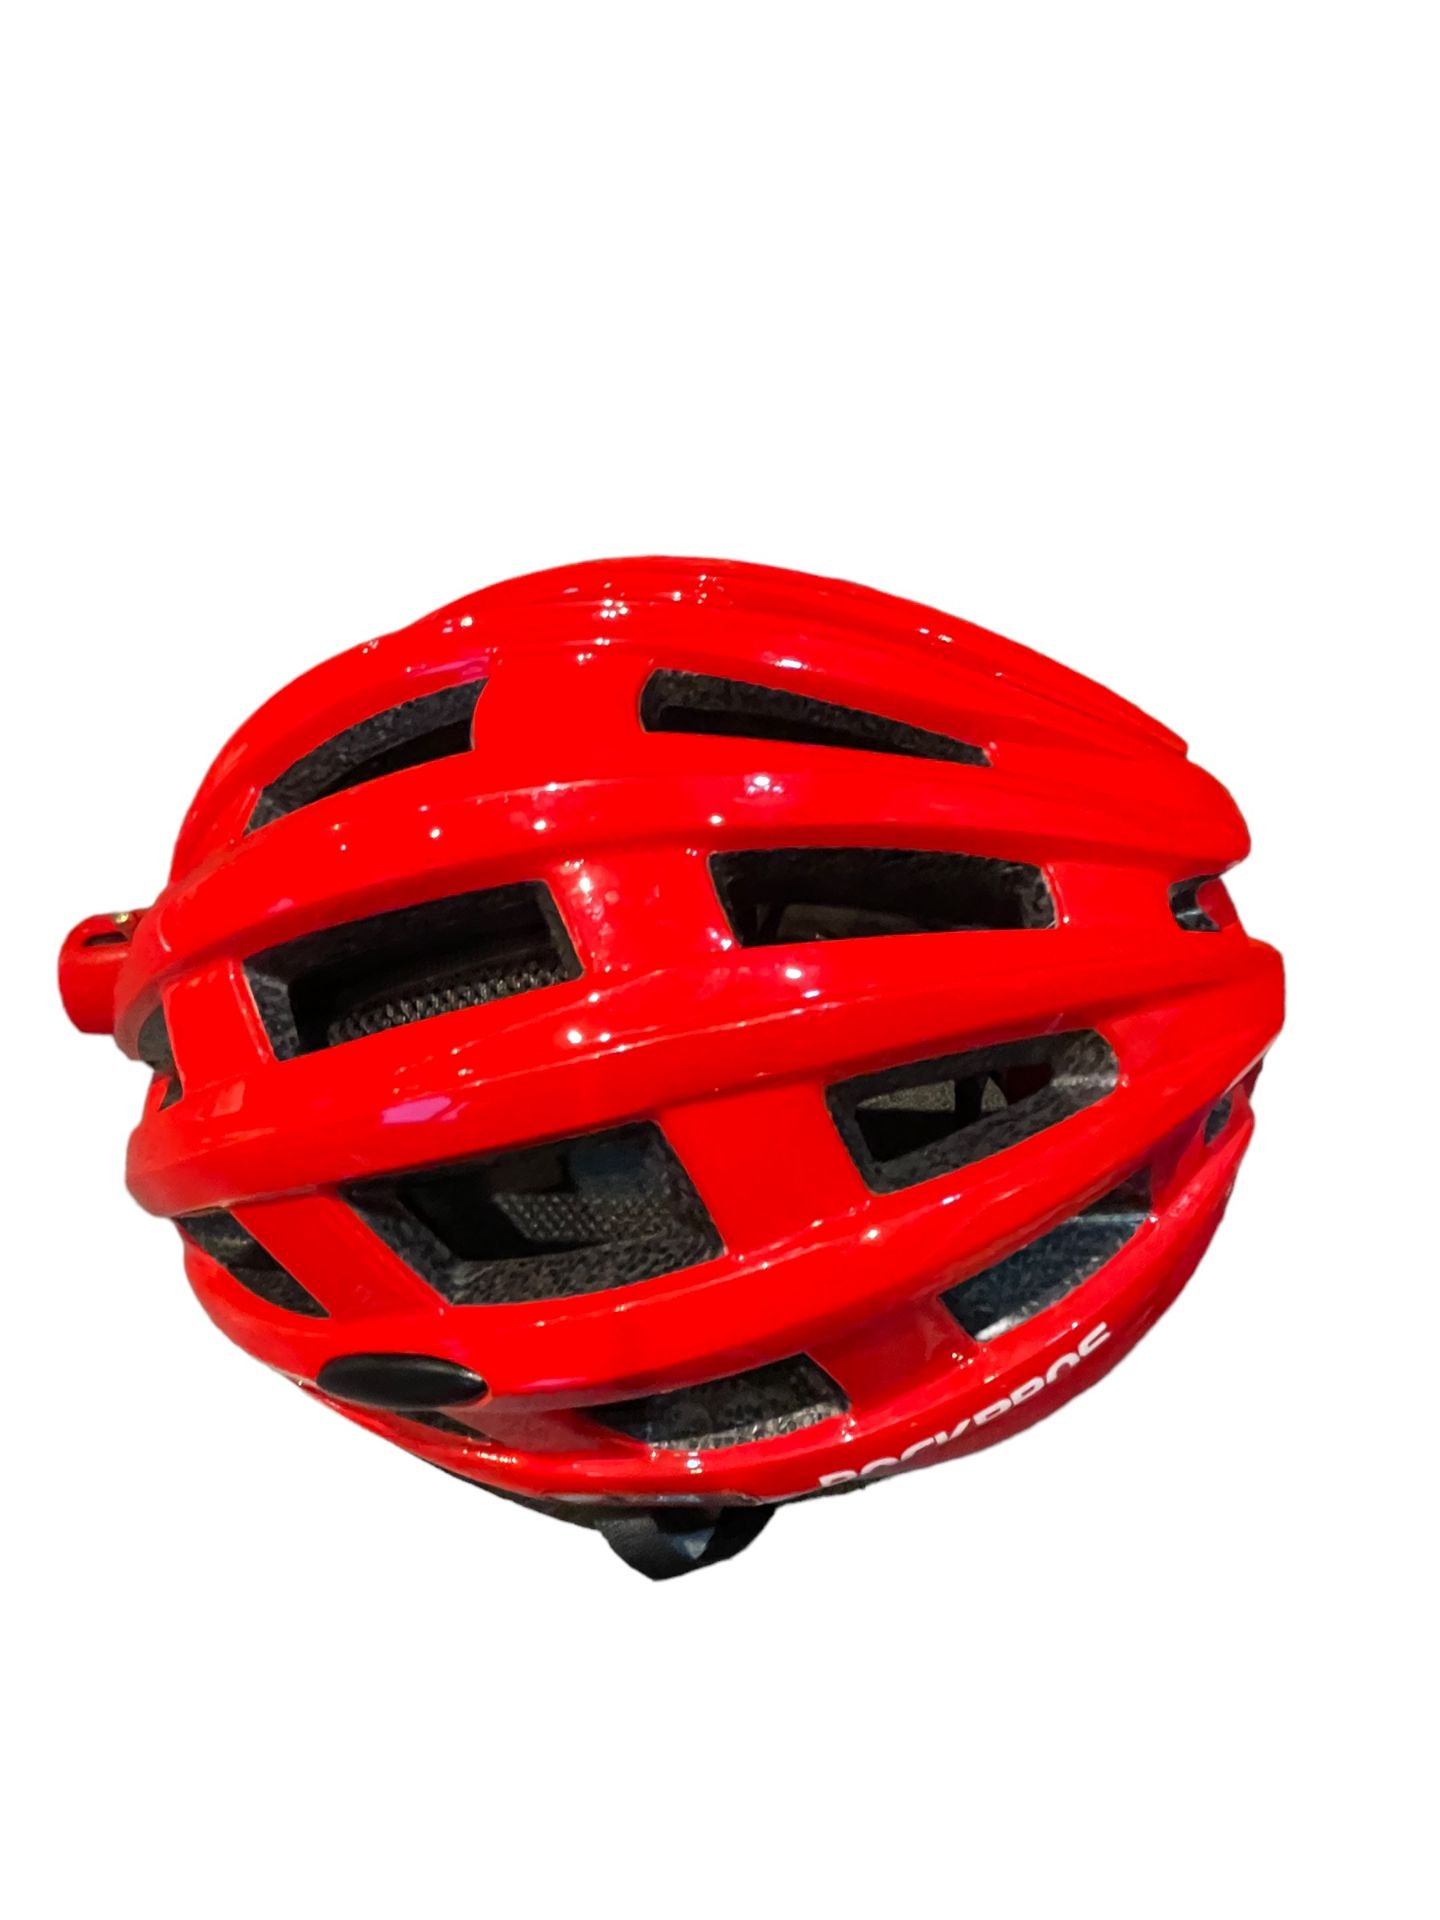 Rock Bros Cycling Helmet fully working boxed demo - Image 5 of 8